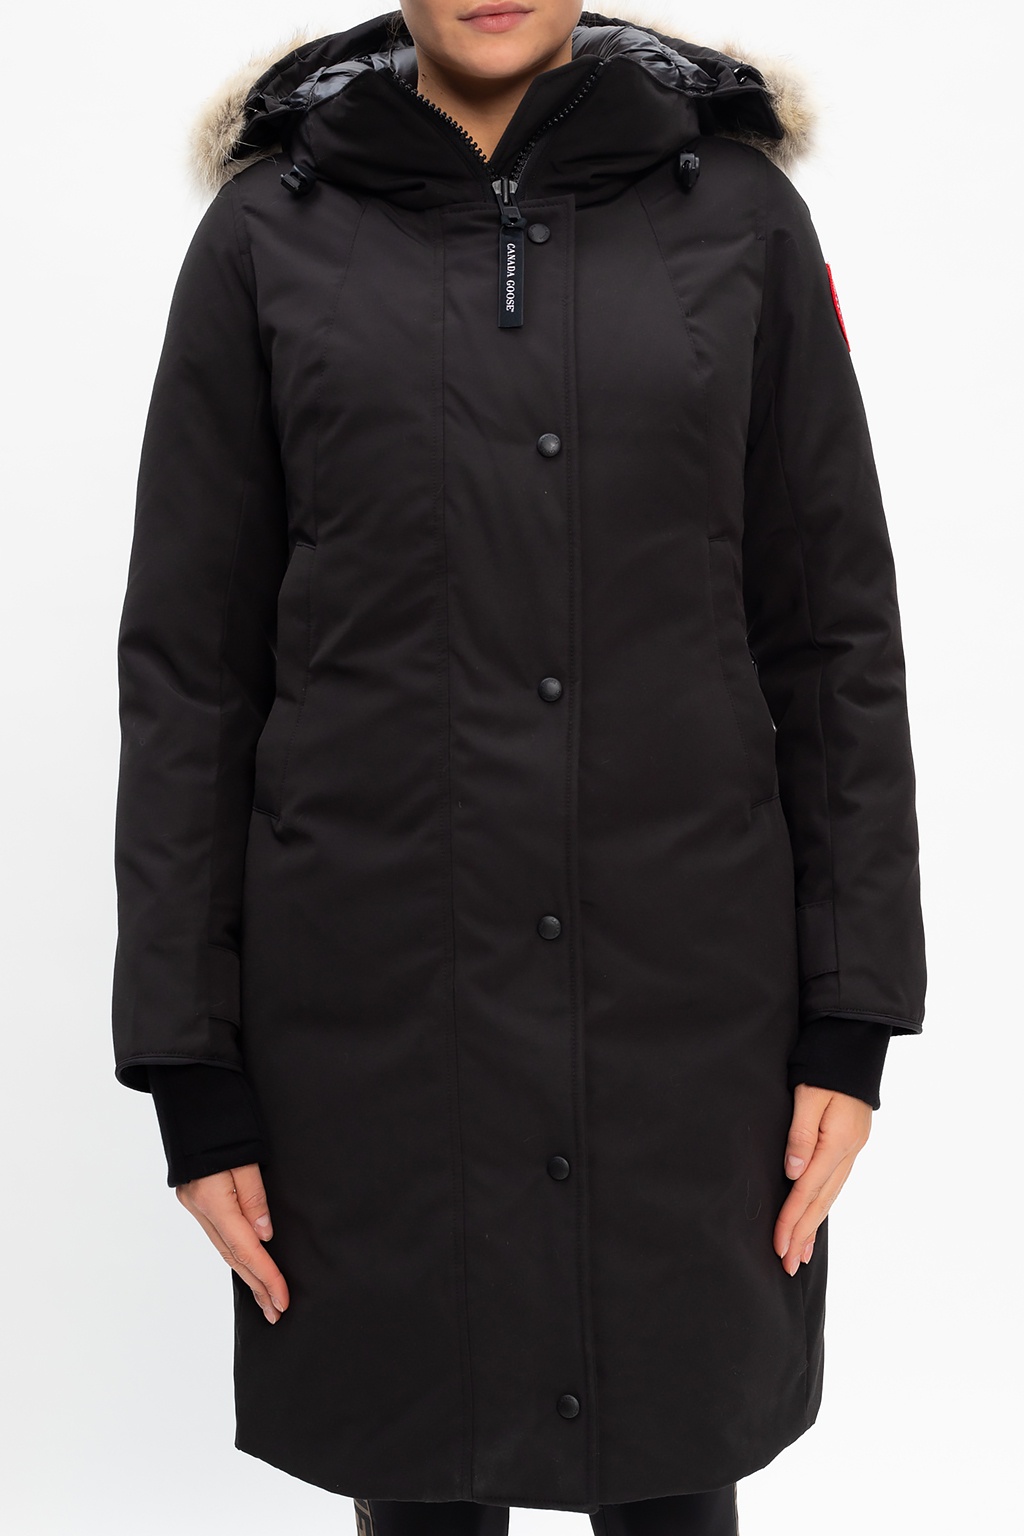 Canada Goose Hooded down BOSS jacket